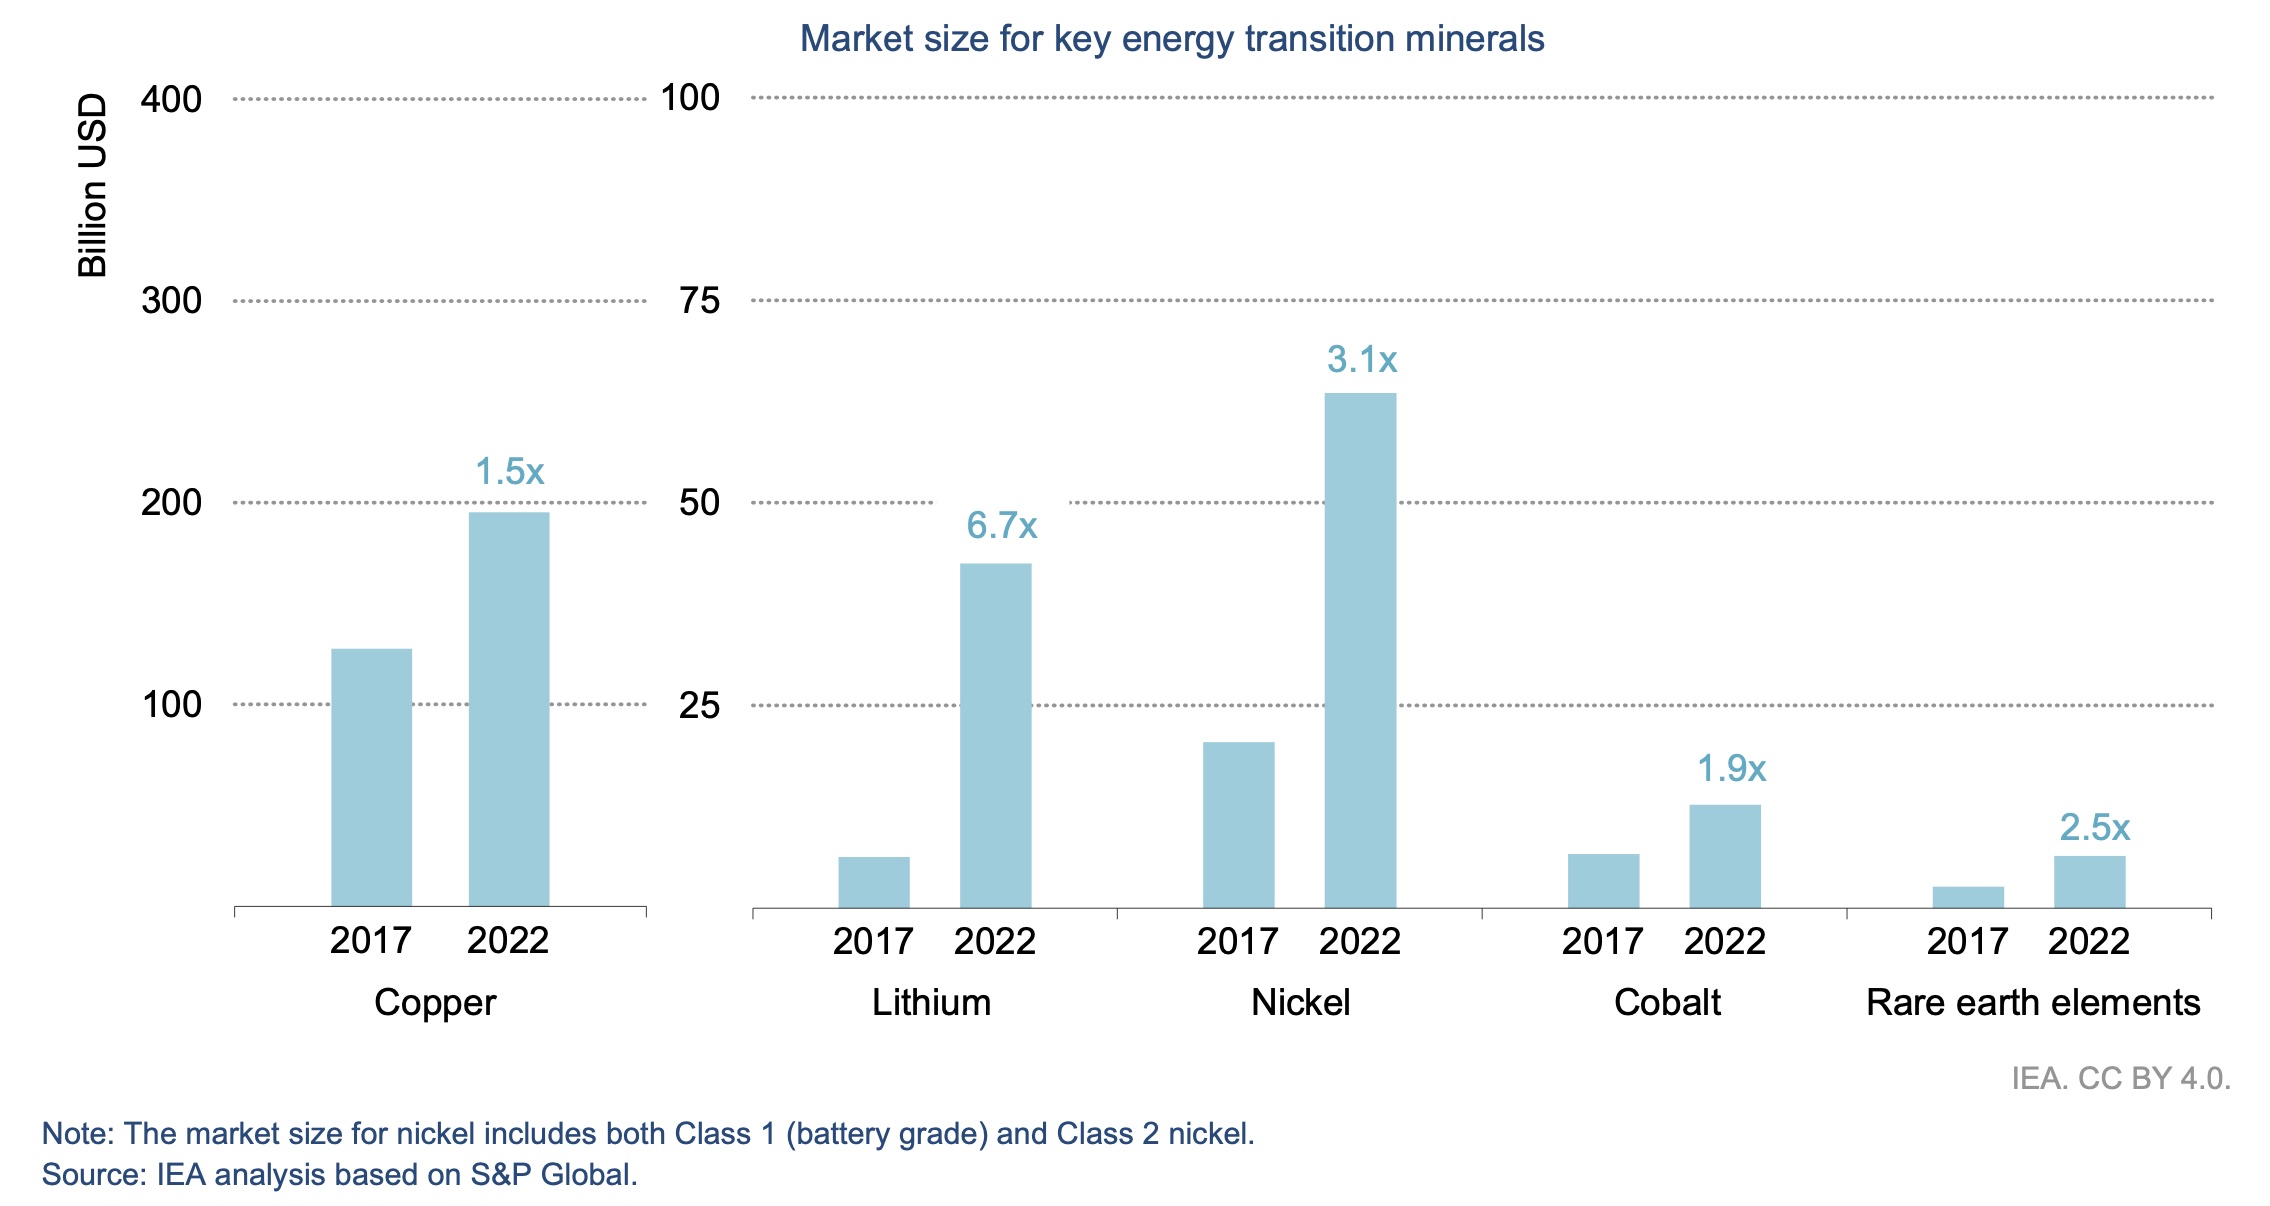 Energy transition minerals market size